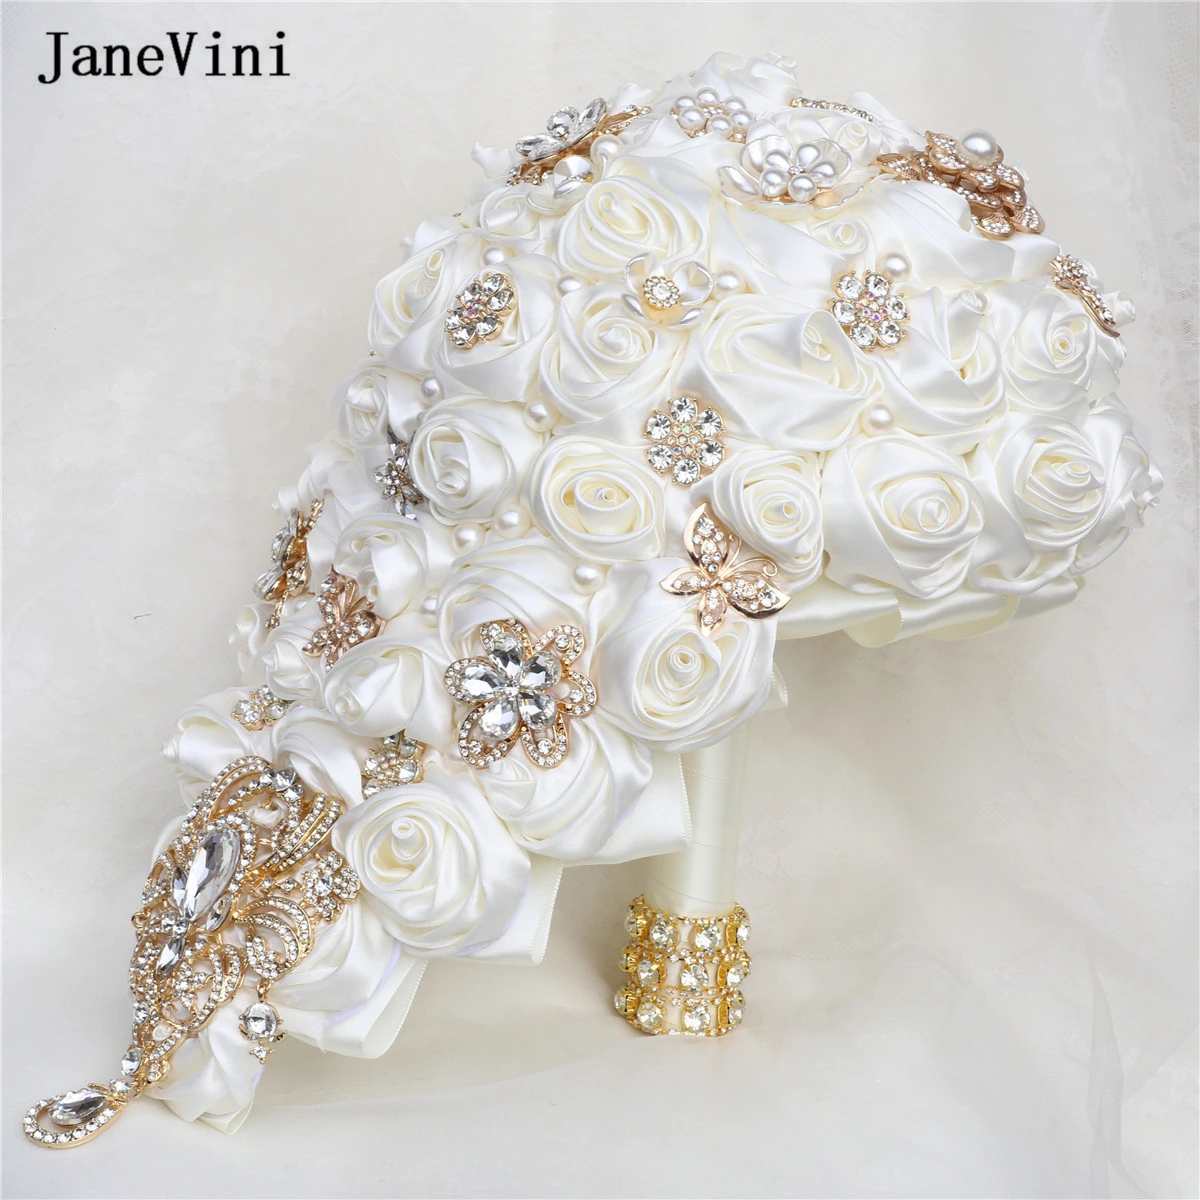 

JaneVini Luxury Crystal Waterfall Bridal Bouquets Artificial Ivory Satin Roses Flowers Cascading Bouquet Accessories for Bride